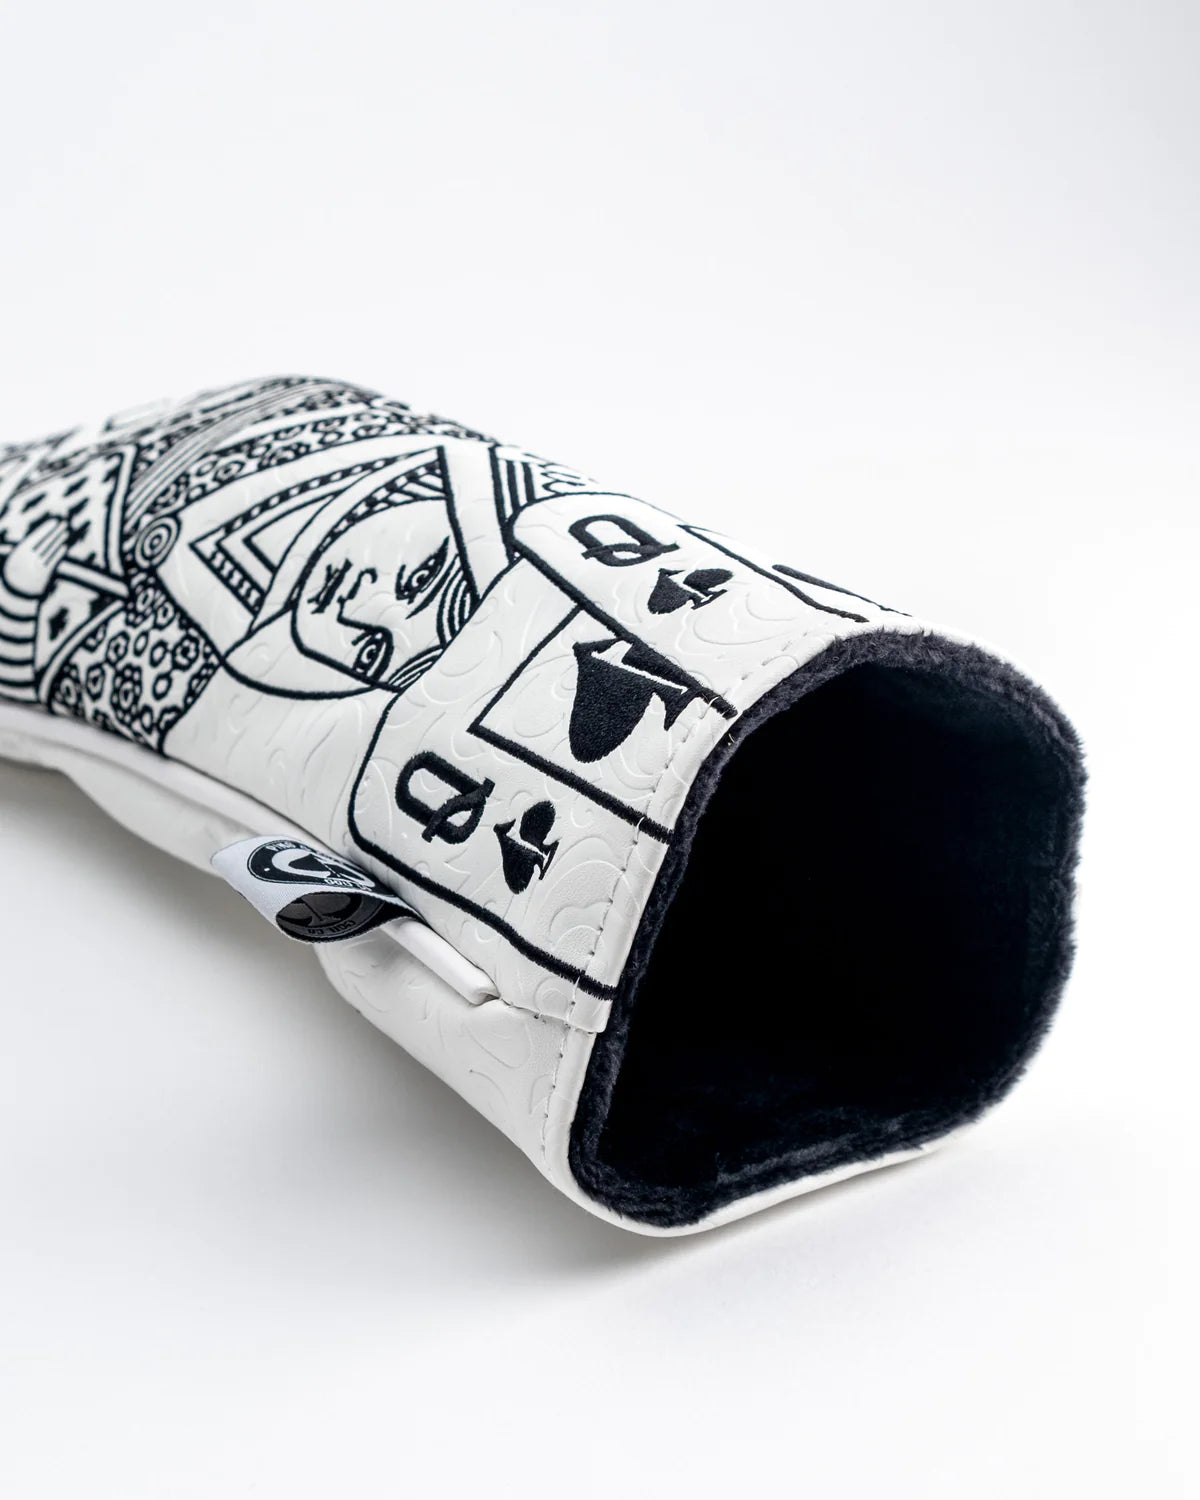 White Out Queen of Spades - Fairway wood Headcover